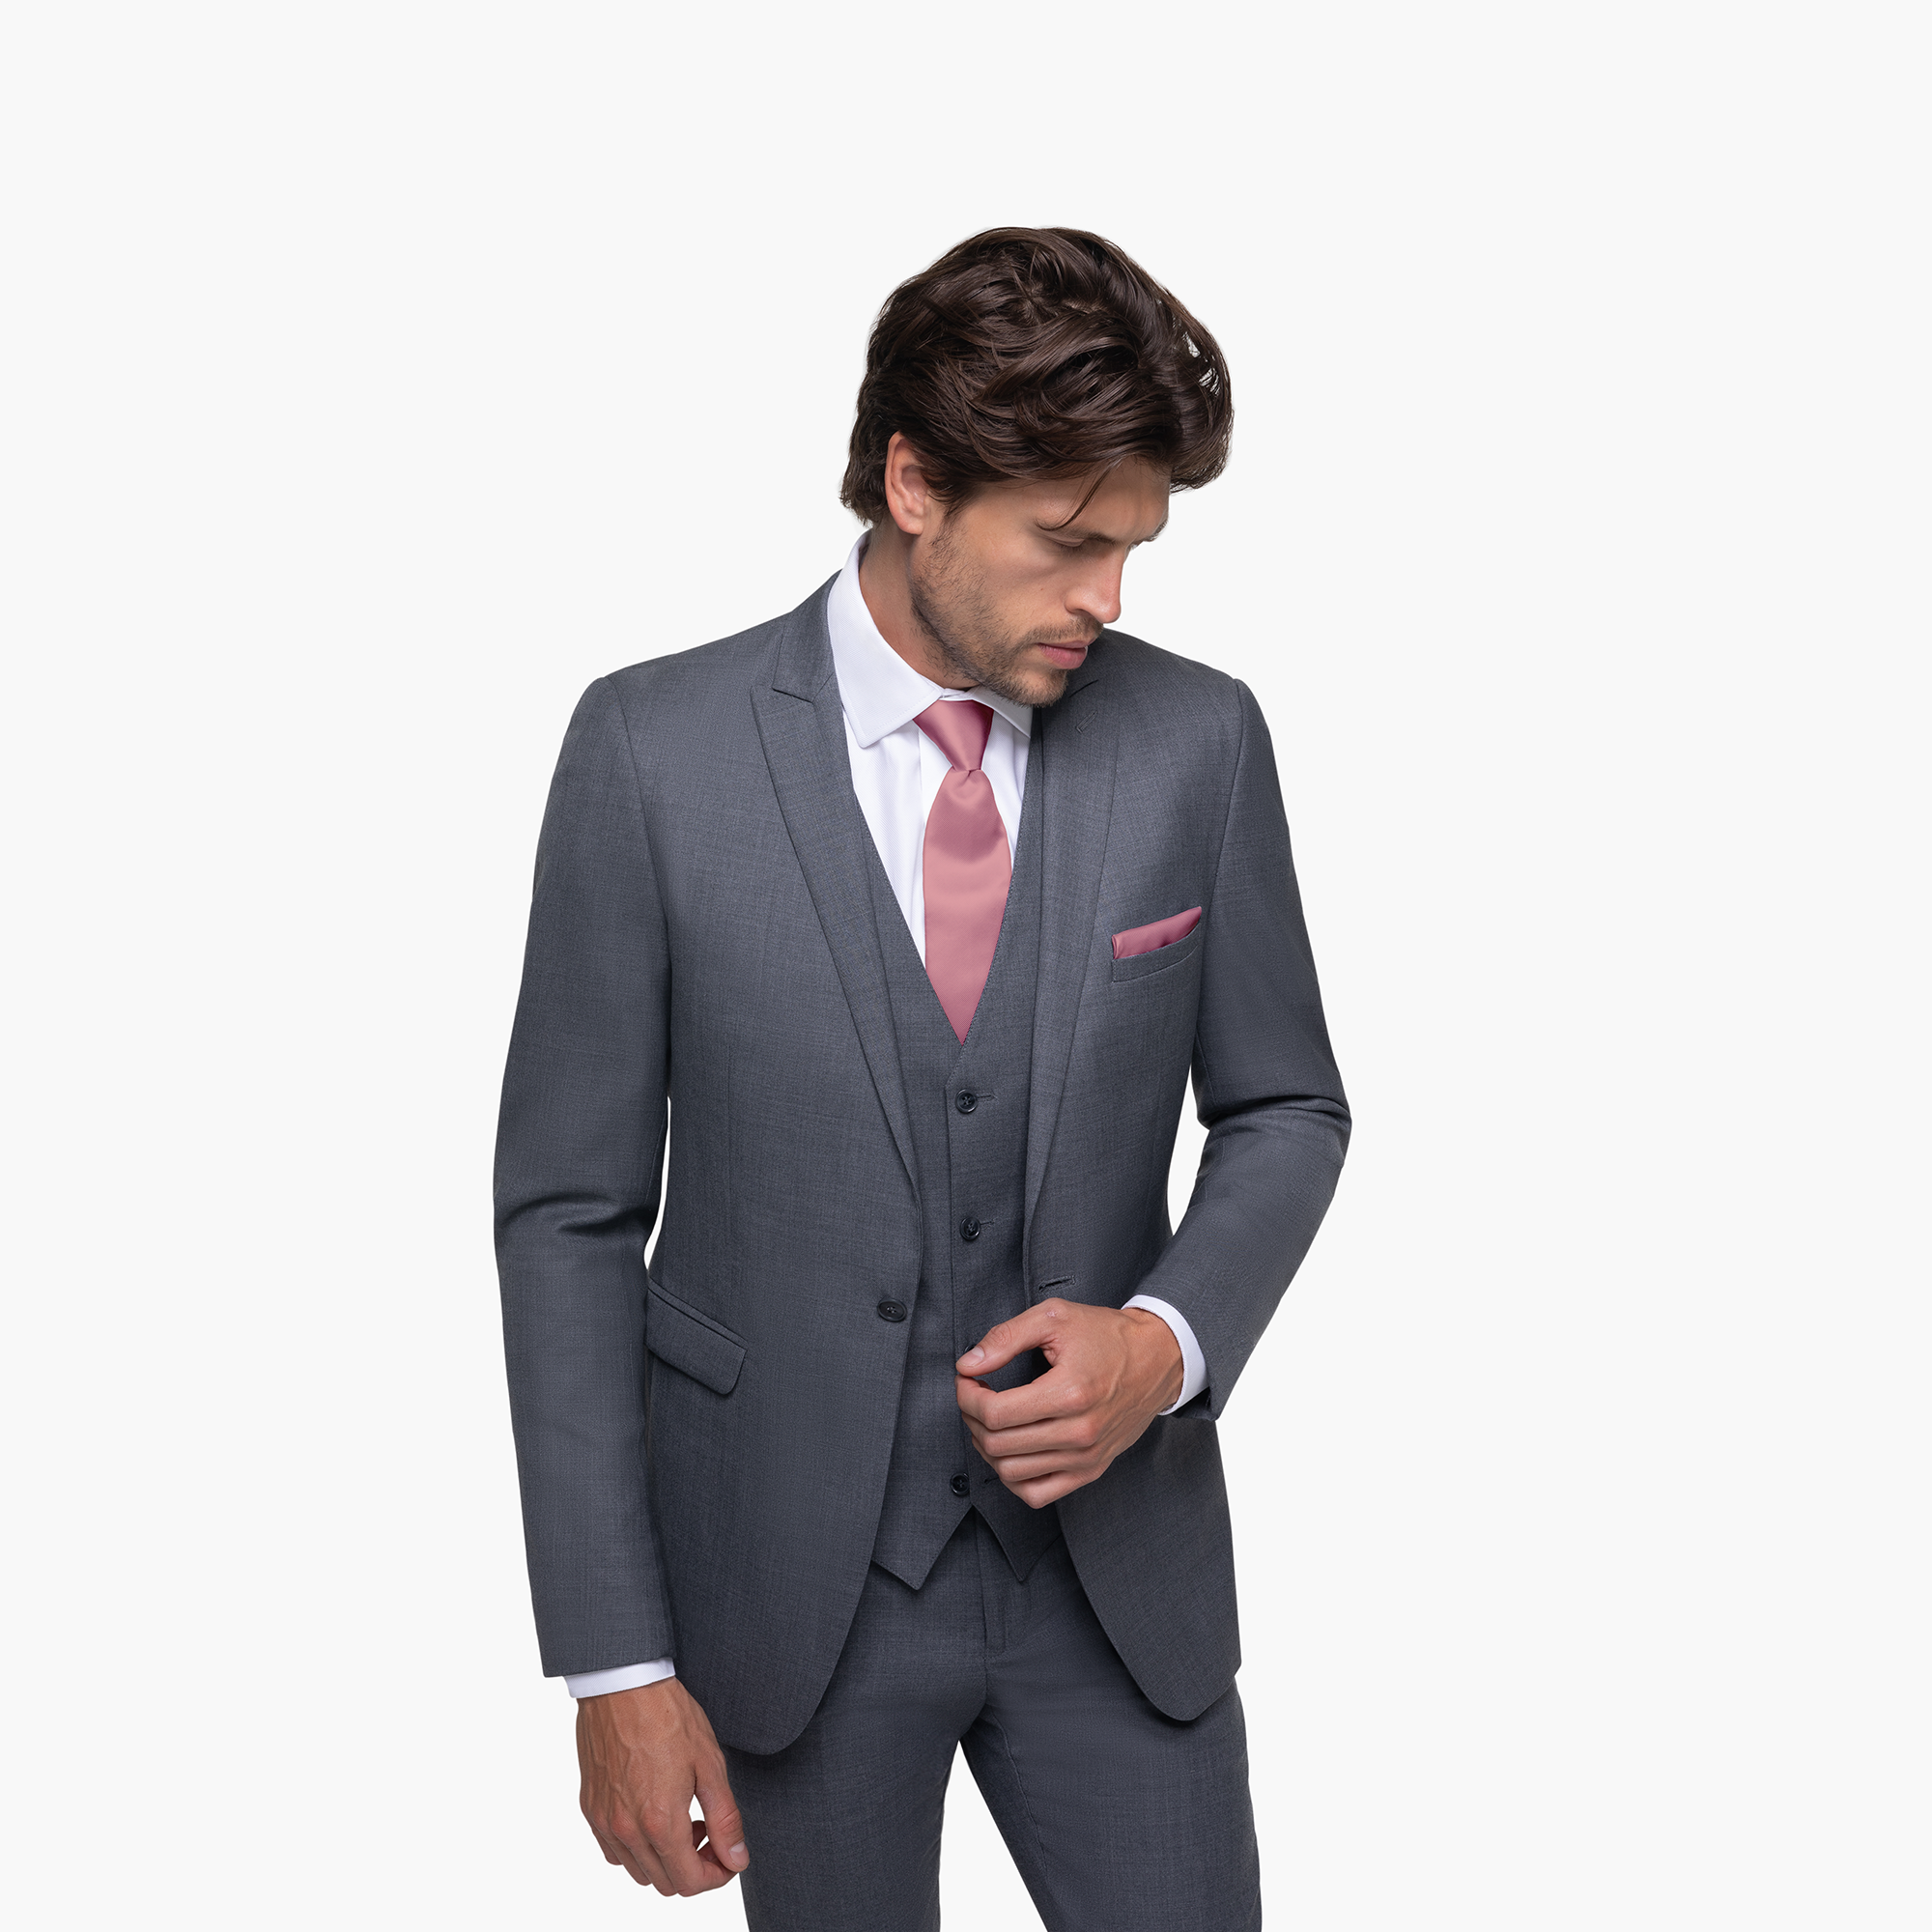 Charcoal Suit with a White Shirt & Grey Tie | Charcoal gray suit, Dark gray  suit, Mens dark grey suit